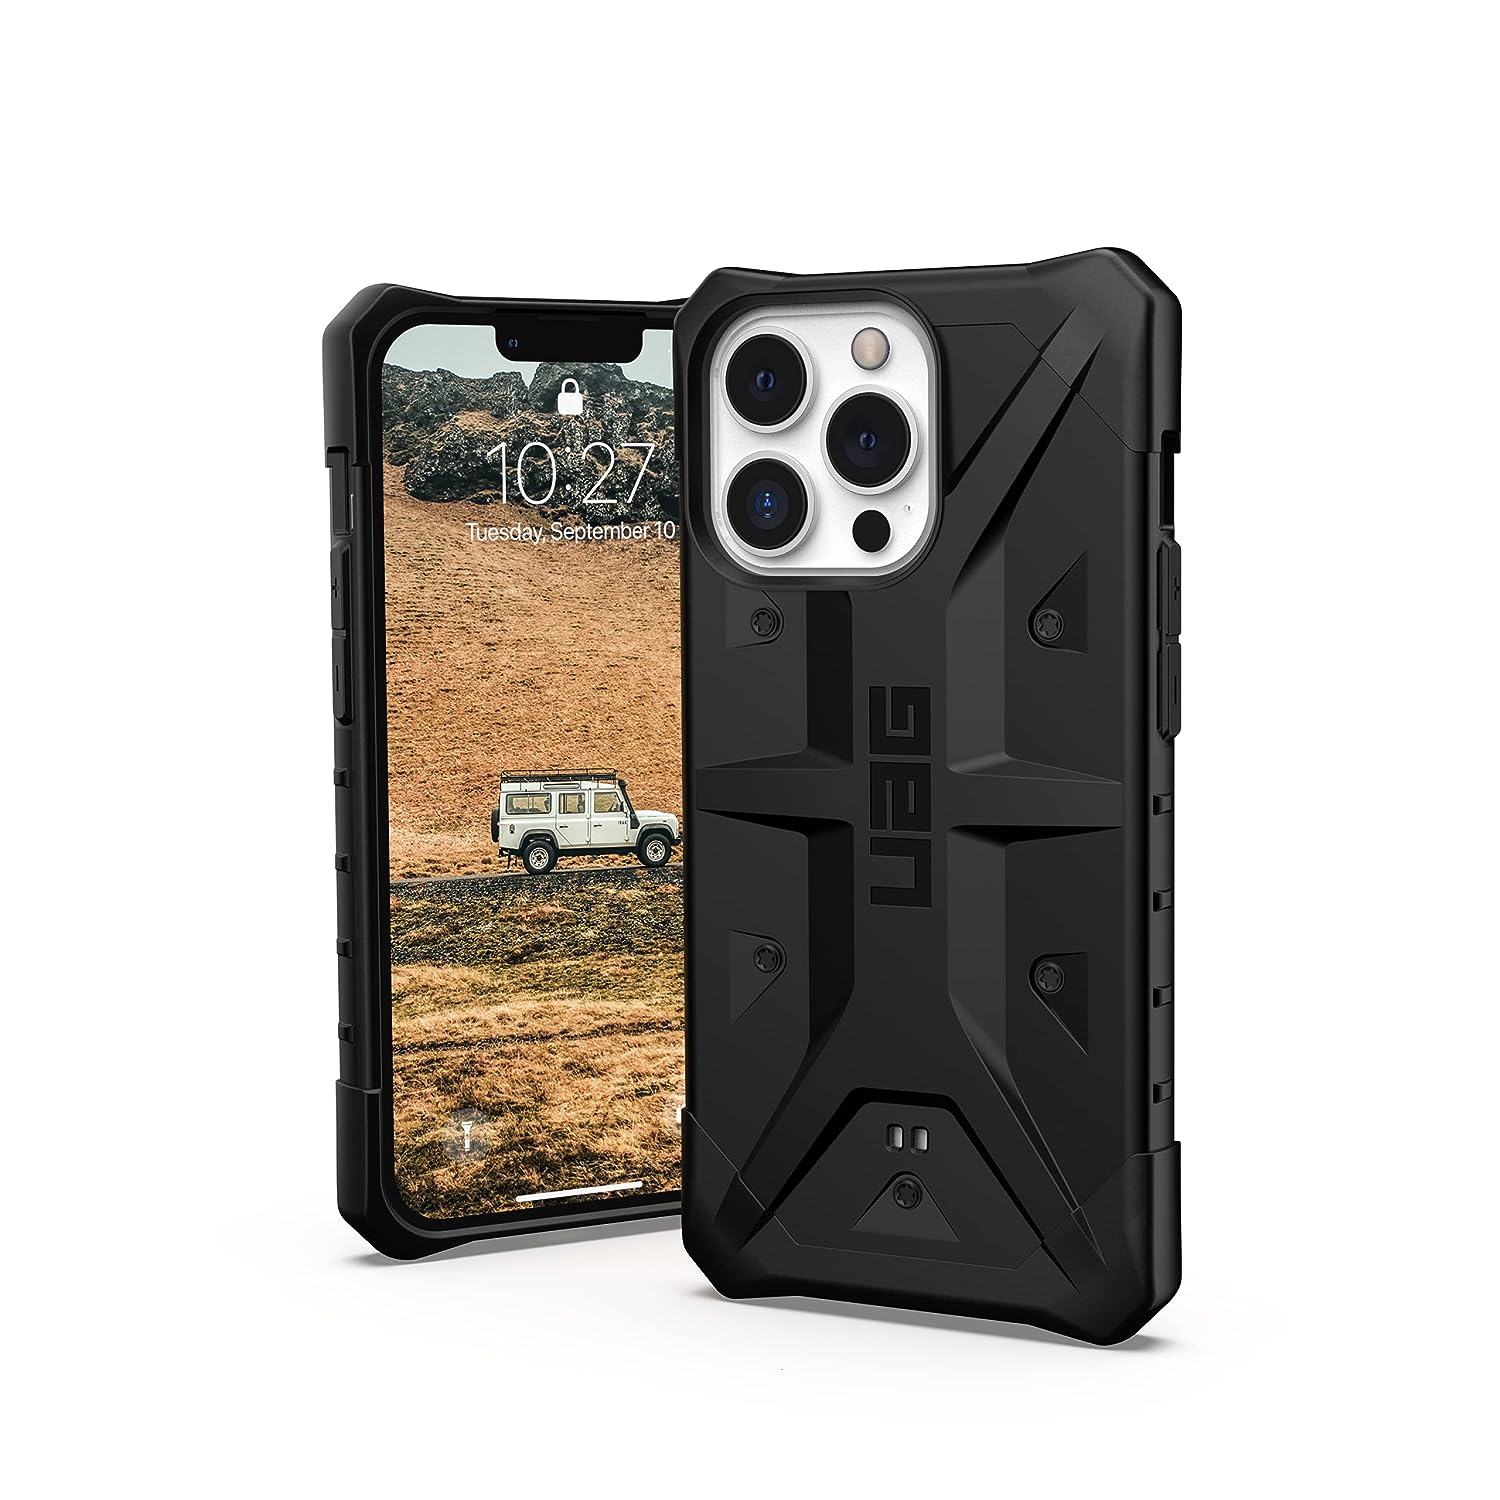 iPhone 13 Pro Armor Cover | Original Urban Armor Slim Fit Rugged Protective Case/Cover Designed For Apple iPhone 13 Pro UAG Black